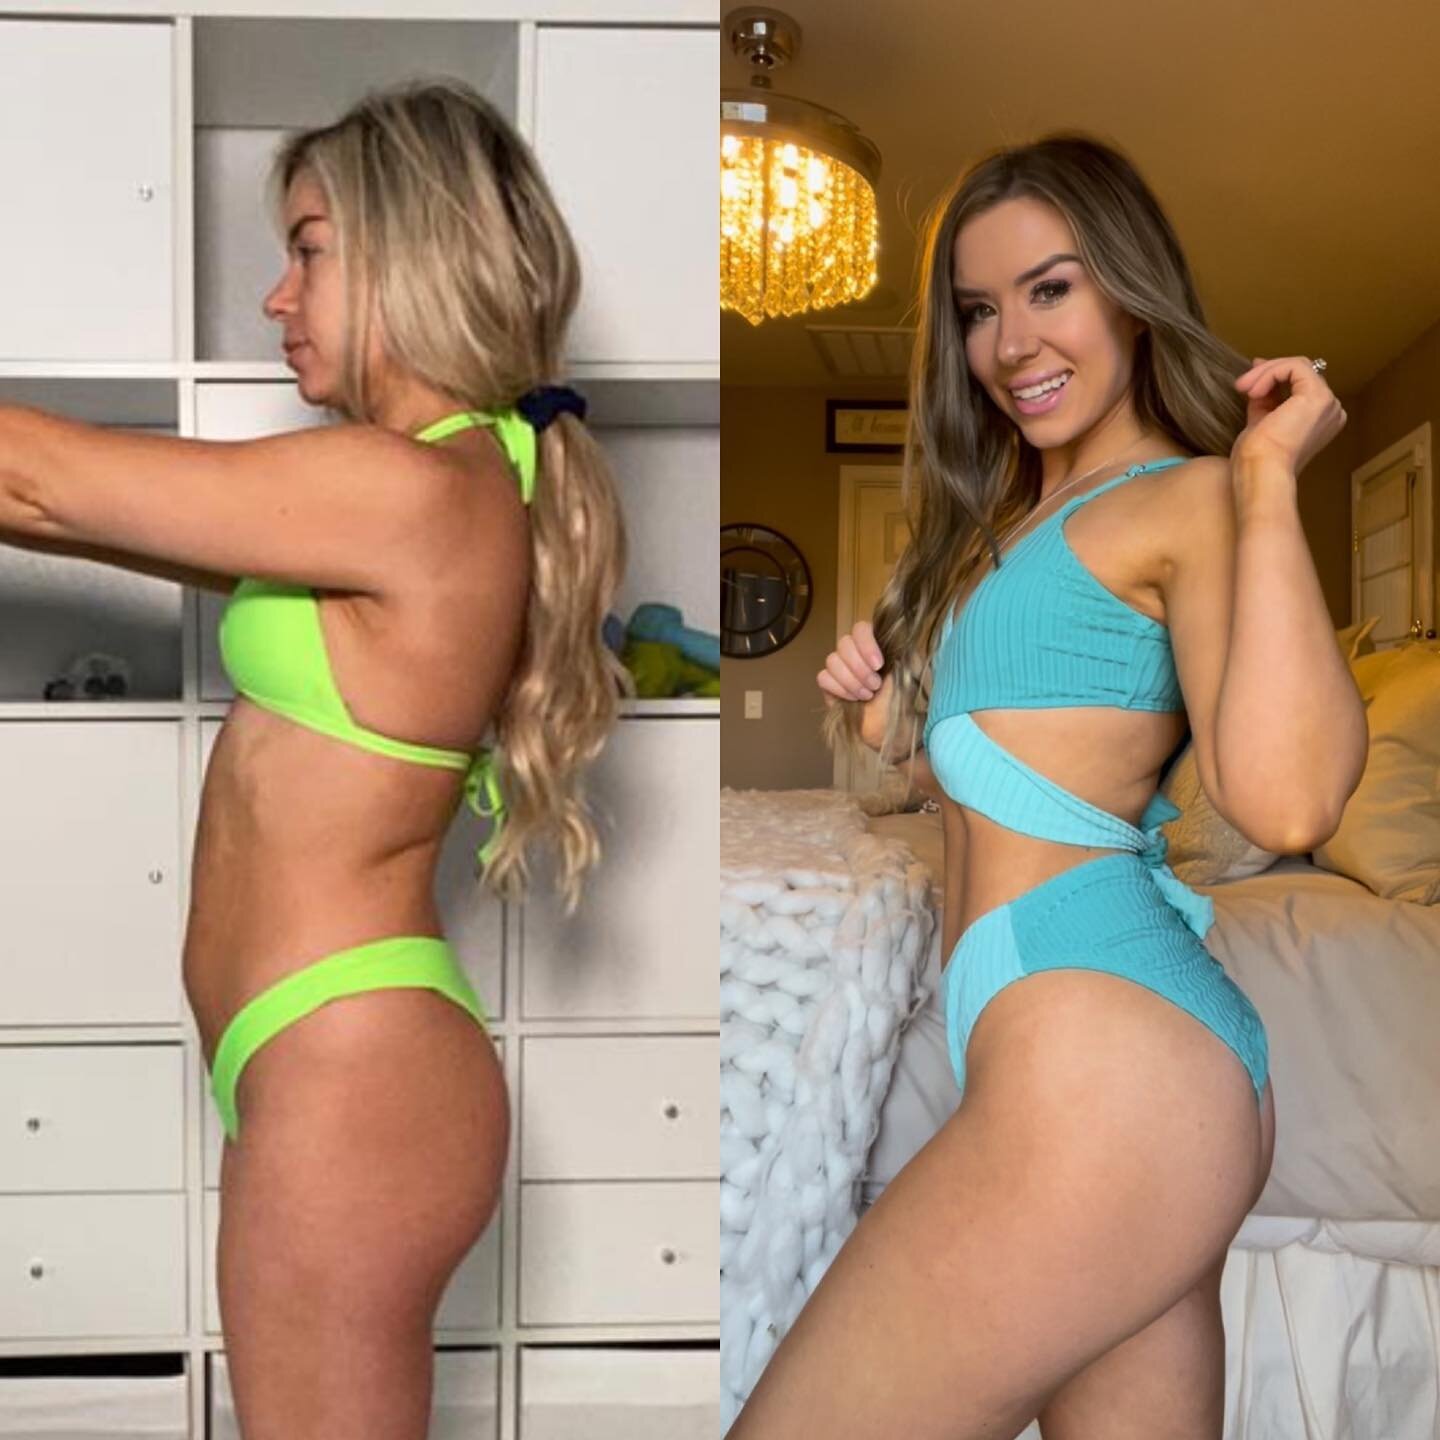 👈🏼Left photo was me 2 months postpartum and right is me today🦋

Everyone&rsquo;s postpartum journey is different. Here are a few things that helped me during mine:
✨giving myself lots of grace and not placing any timelines on myself
✨appreciating 